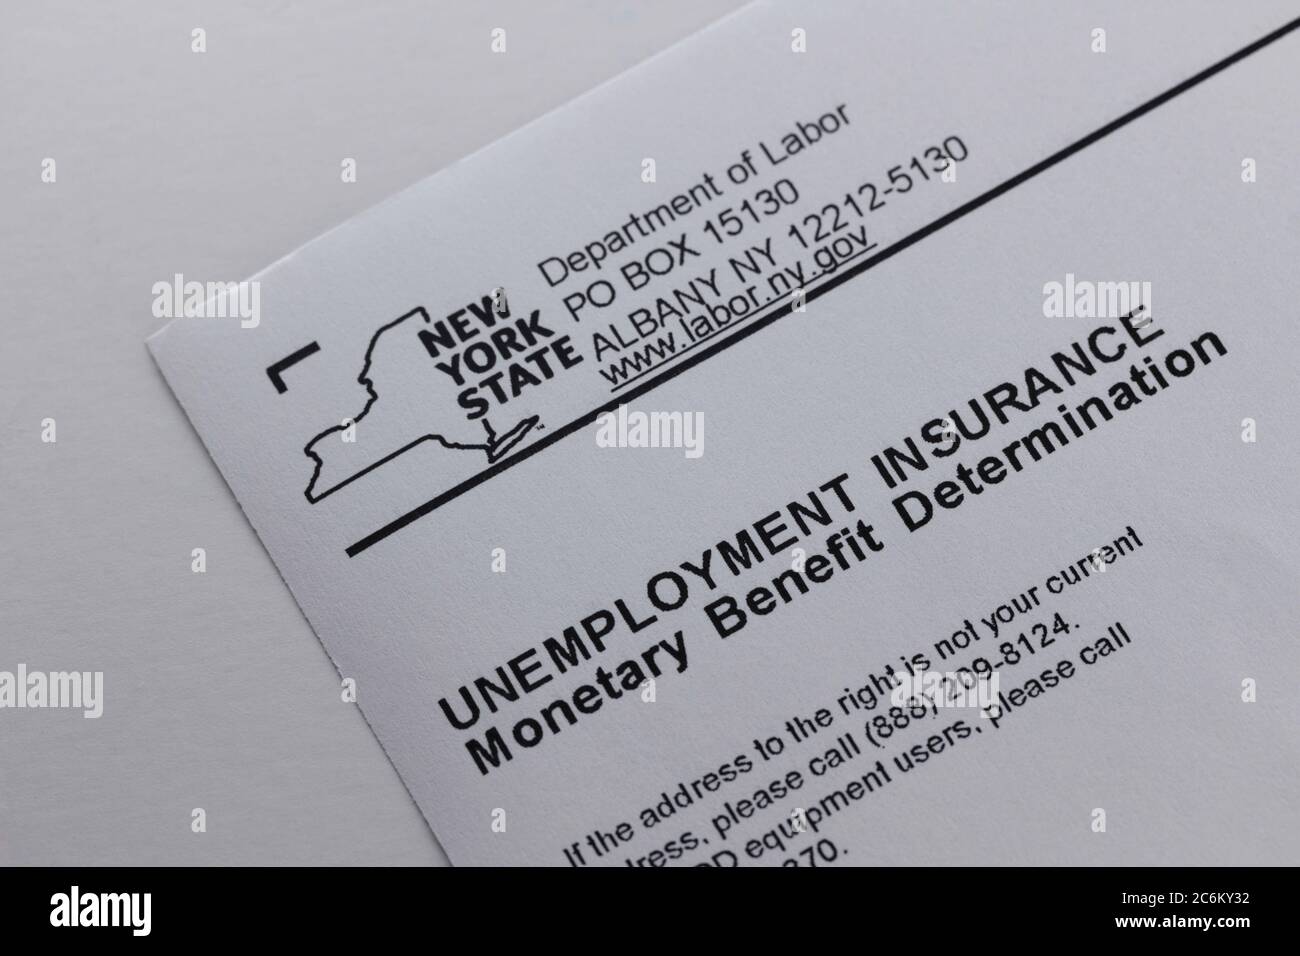 heading of a new york state department of labor paper statement of unemployment insurance monetary benefit determination on white background Stock Photo